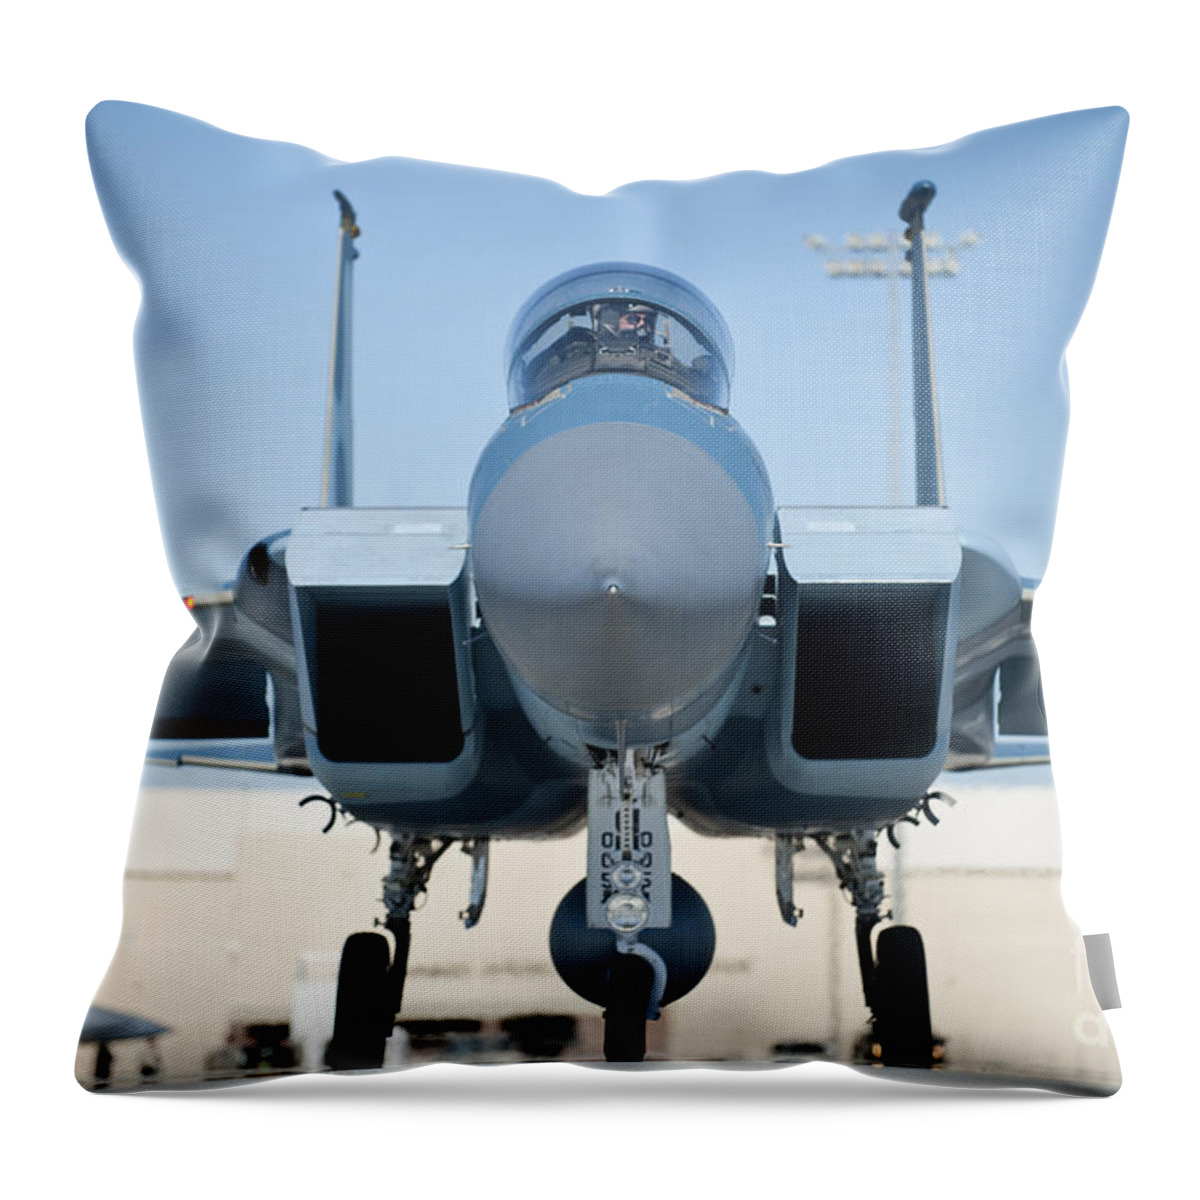 Nellis Air Force Base Throw Pillow featuring the photograph A U.s. Air Force F-15d Eagle Taxis by Stocktrek Images